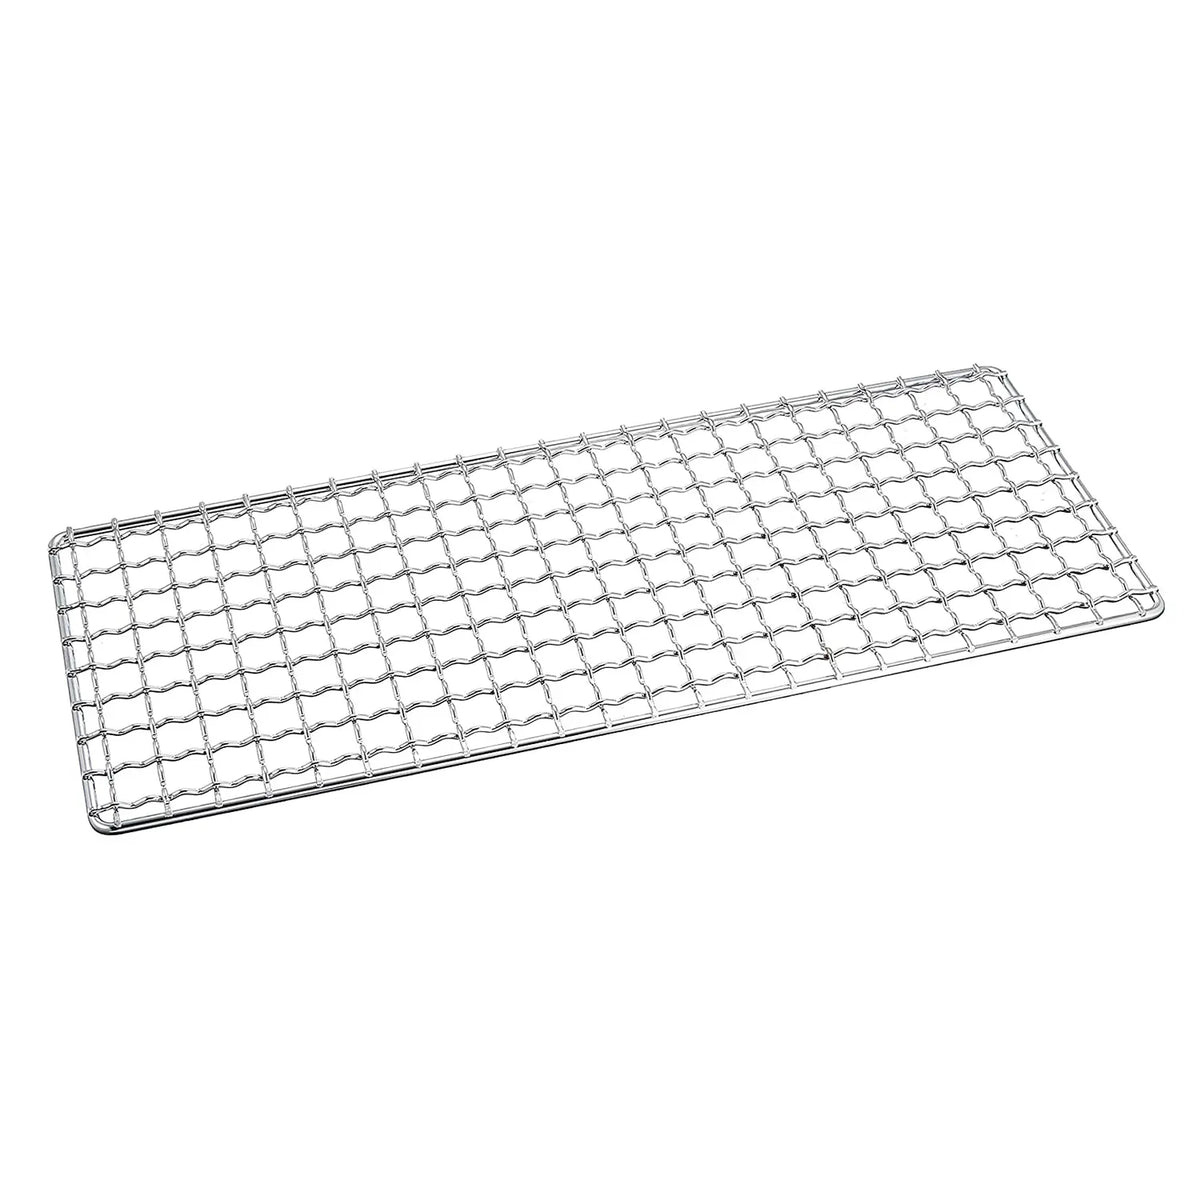 EBM Stainless Steel Chrome Plated Barbecue Grill Mesh